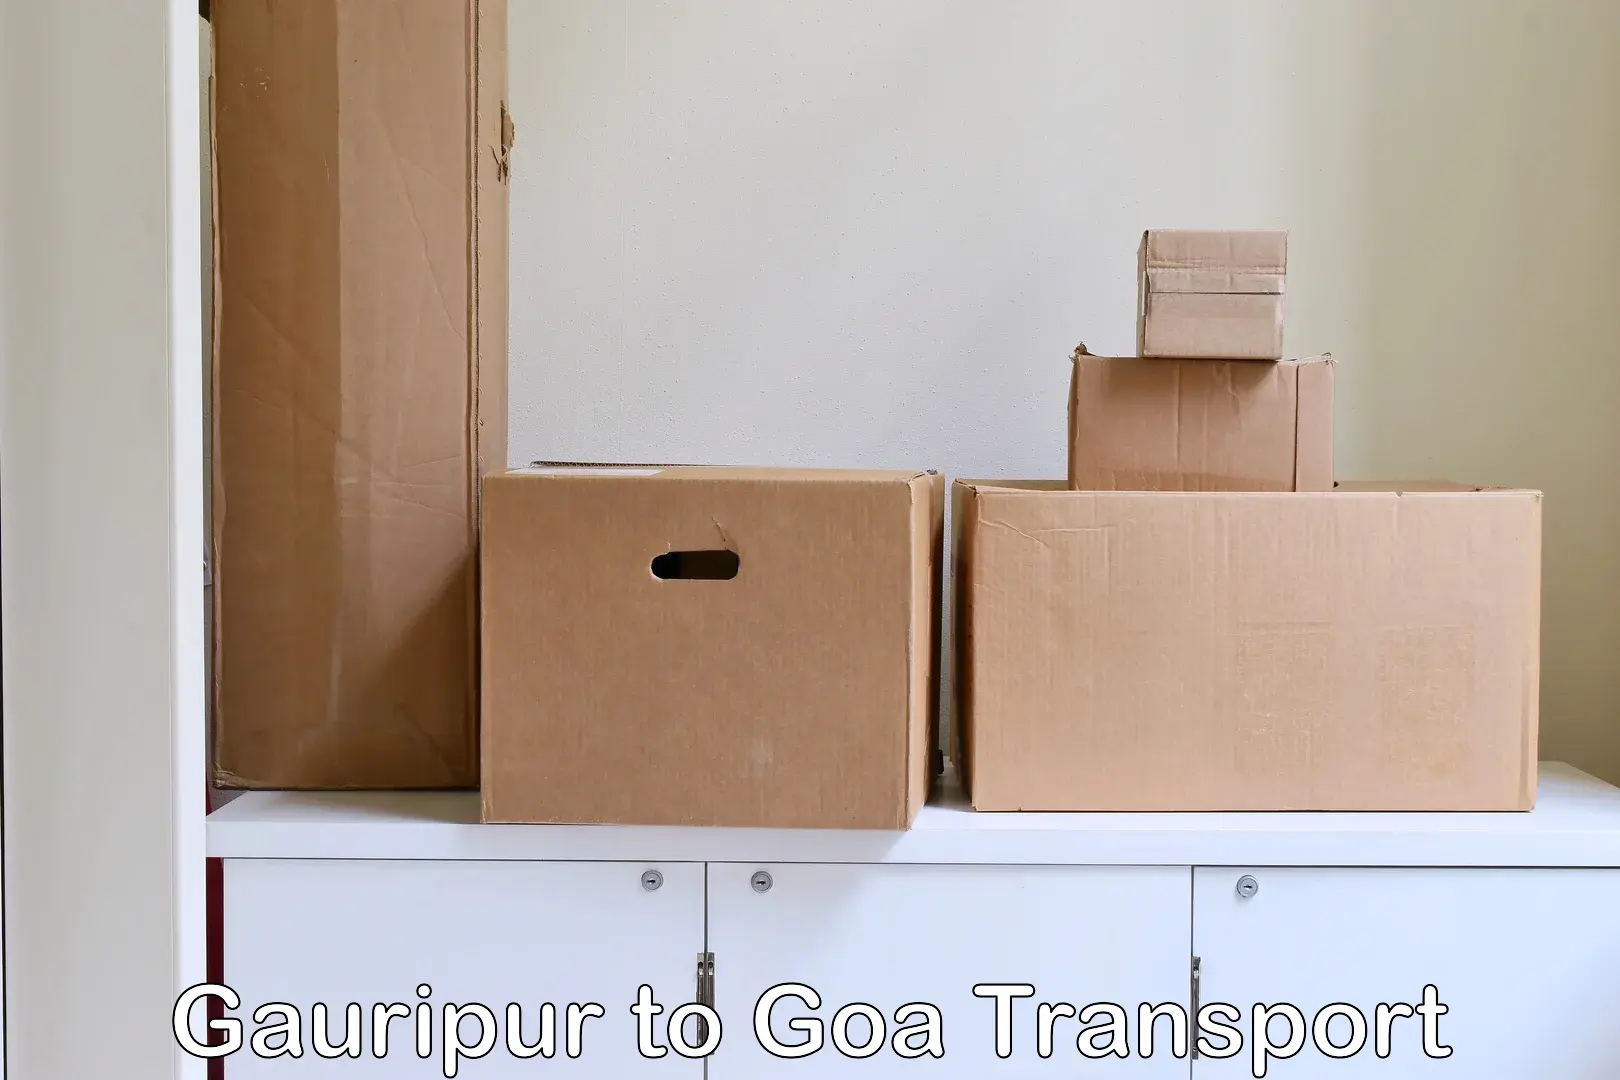 Commercial transport service Gauripur to Goa